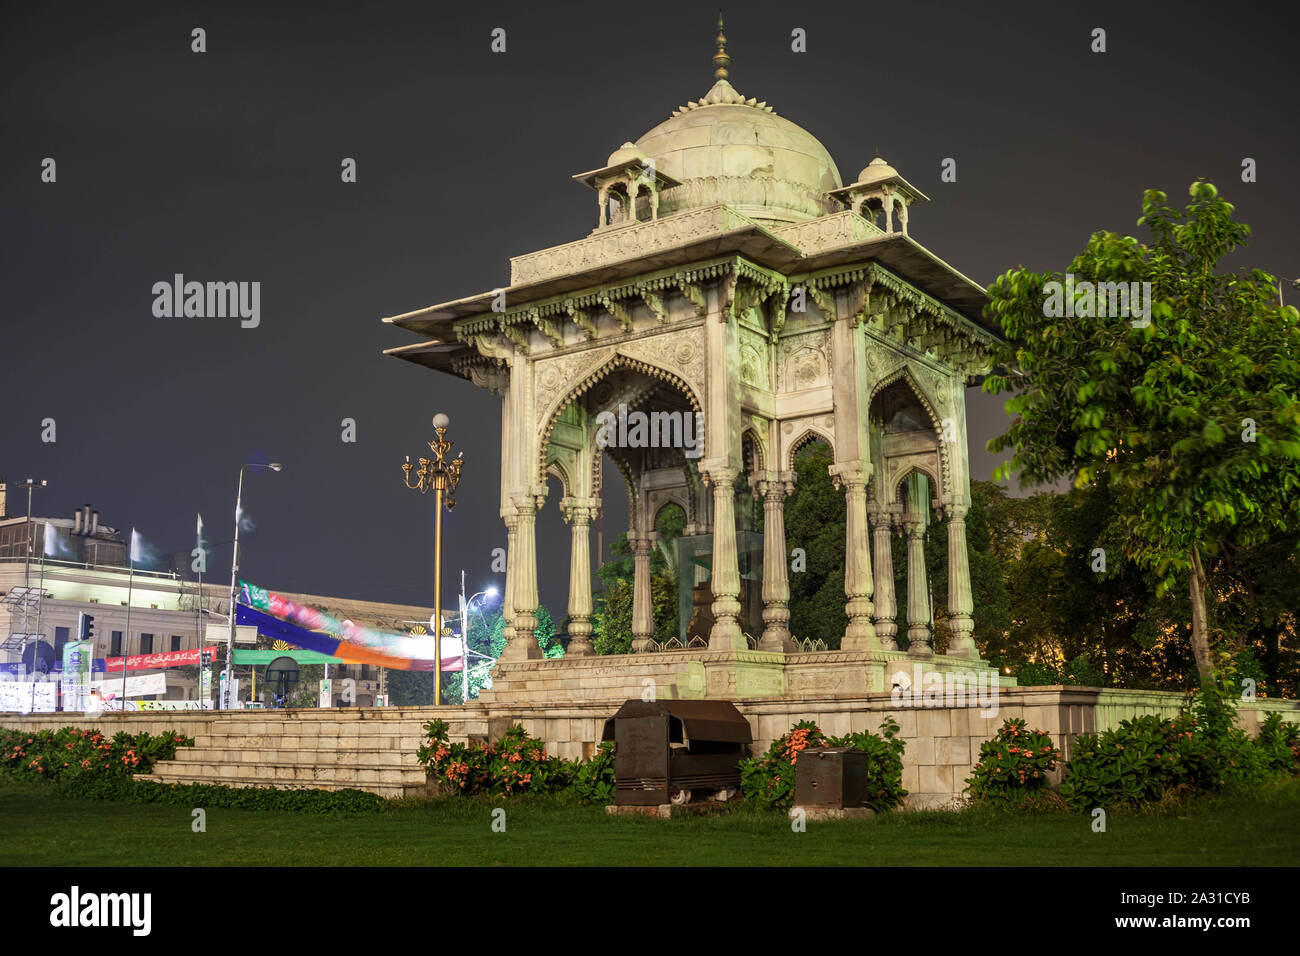 Islamic Summit monument, Charing Cross, officially known as Faisal Chowk, is a major road intersection in Lahore, Punjab, Pakistan. Stock Photo